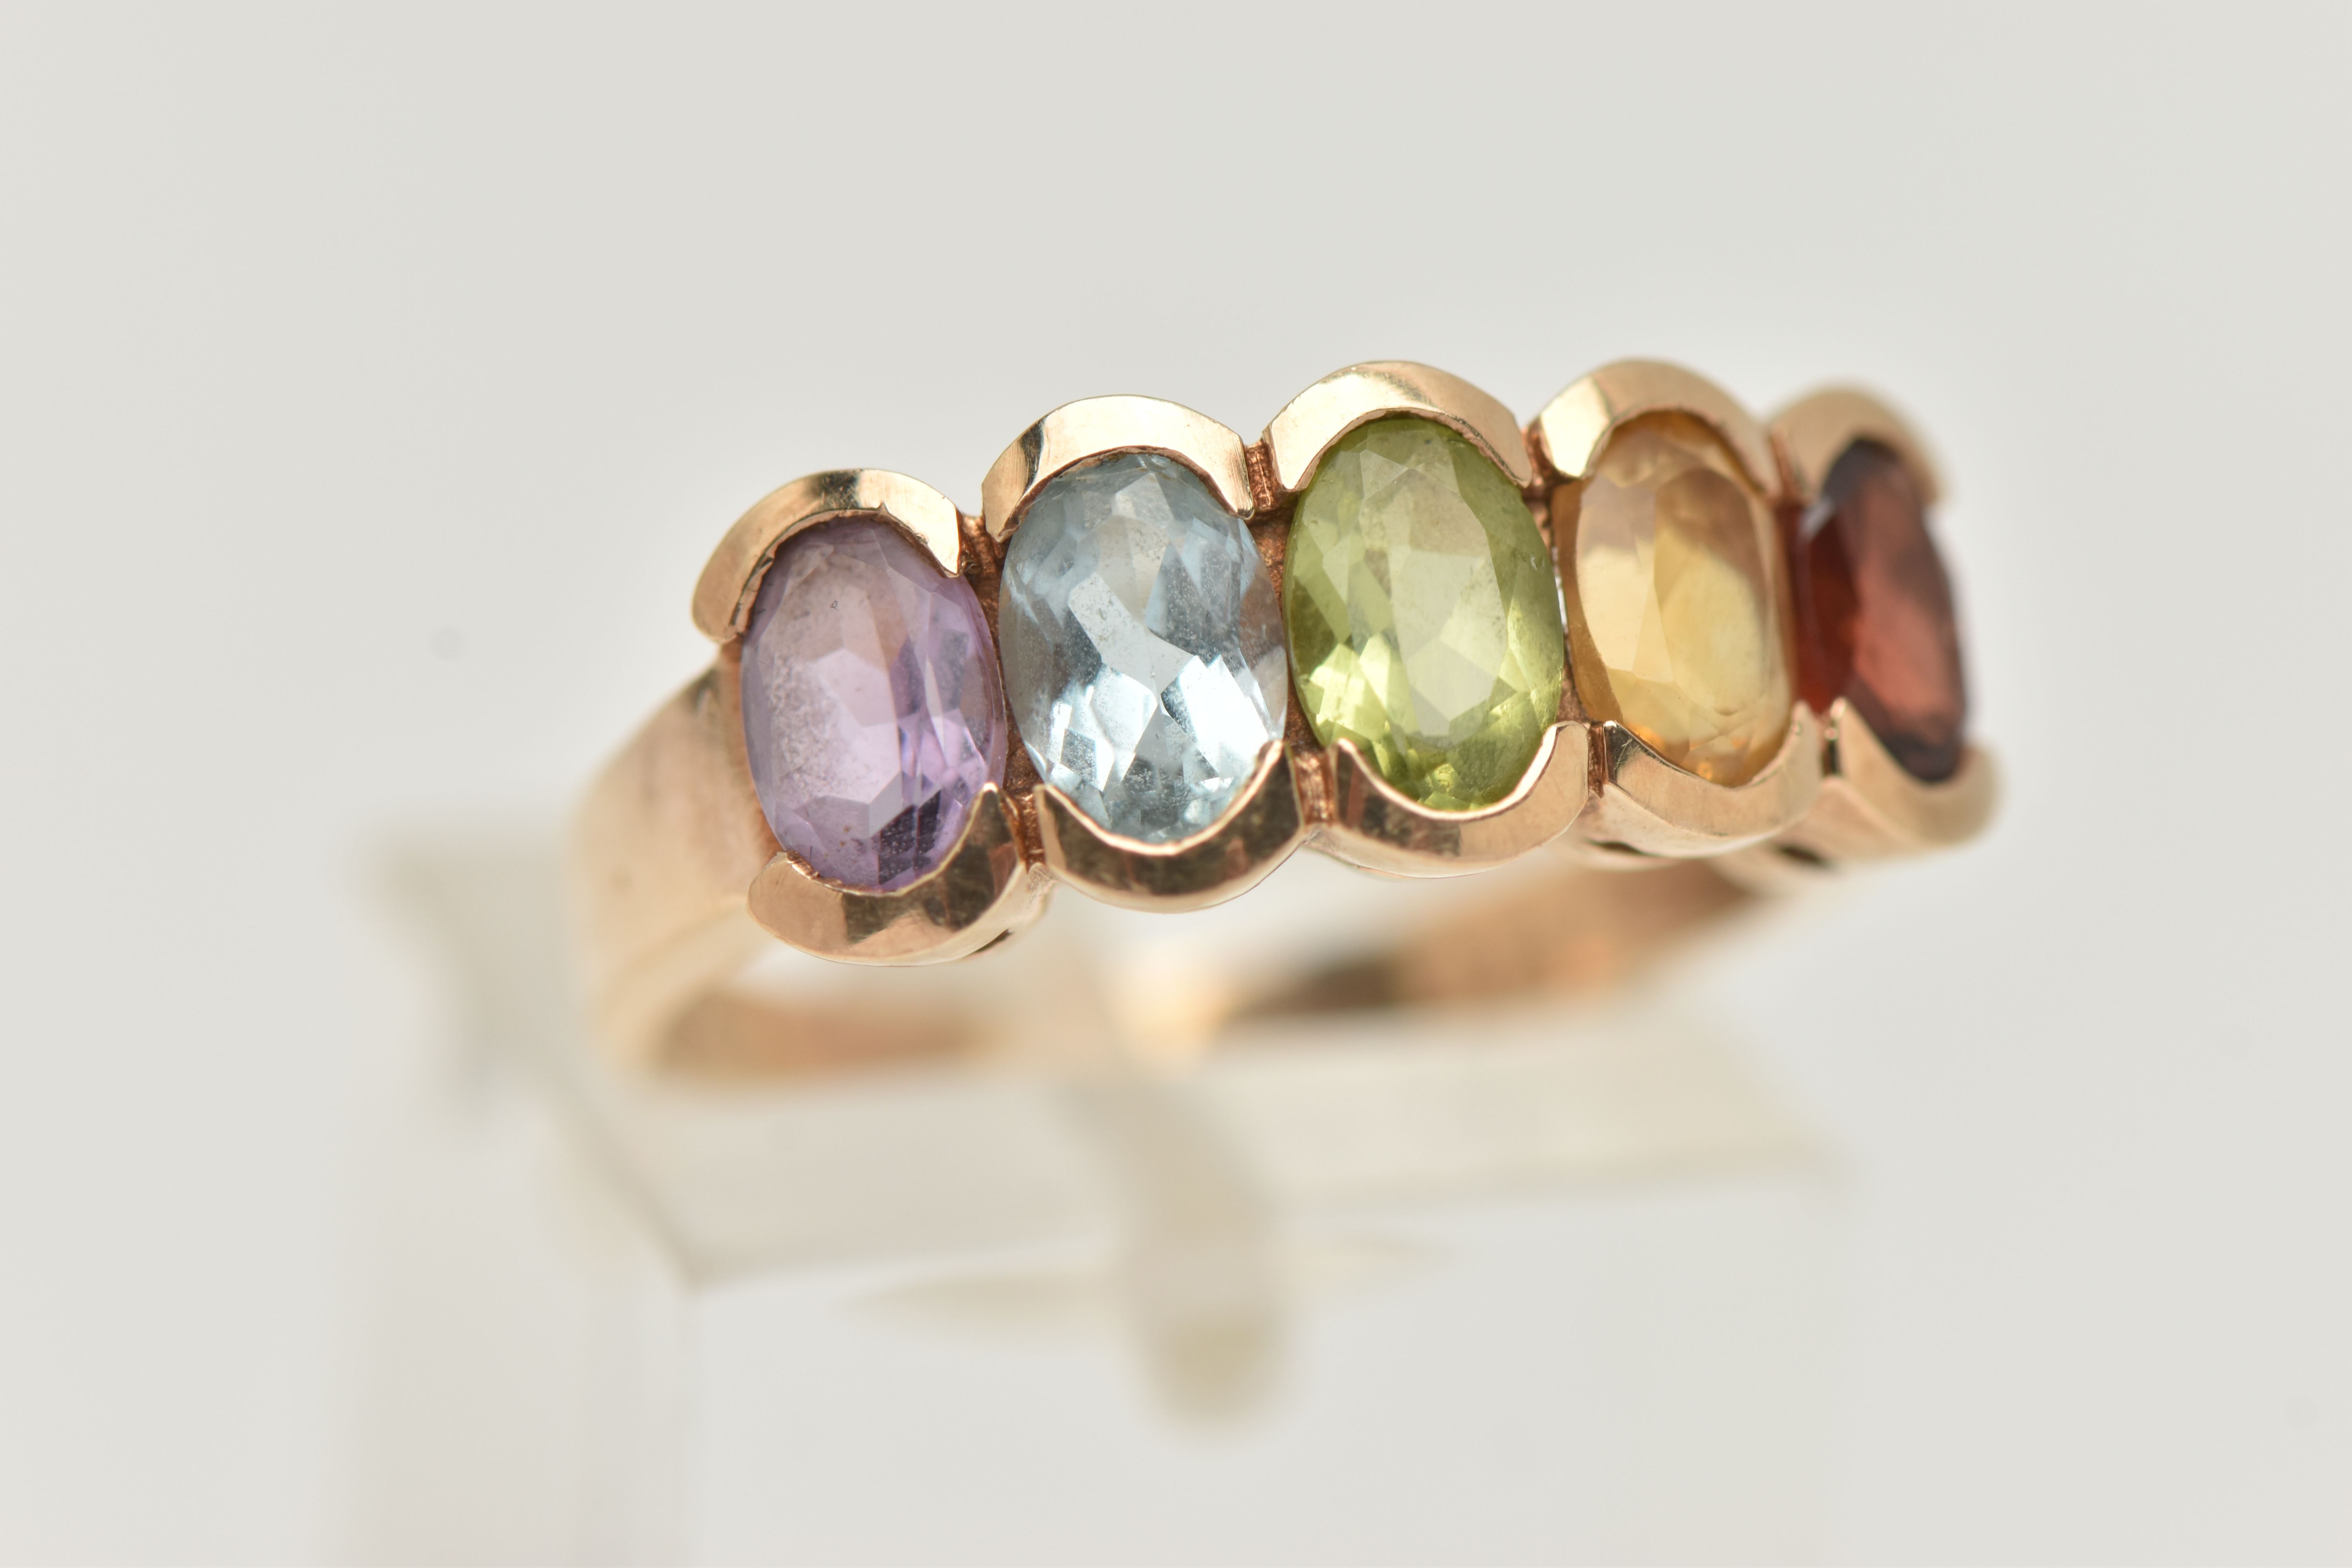 A 9CT GOLD MULTI GEM SET RING, designed as a row of five oval cut stones to include garnet, citrine, - Image 4 of 4